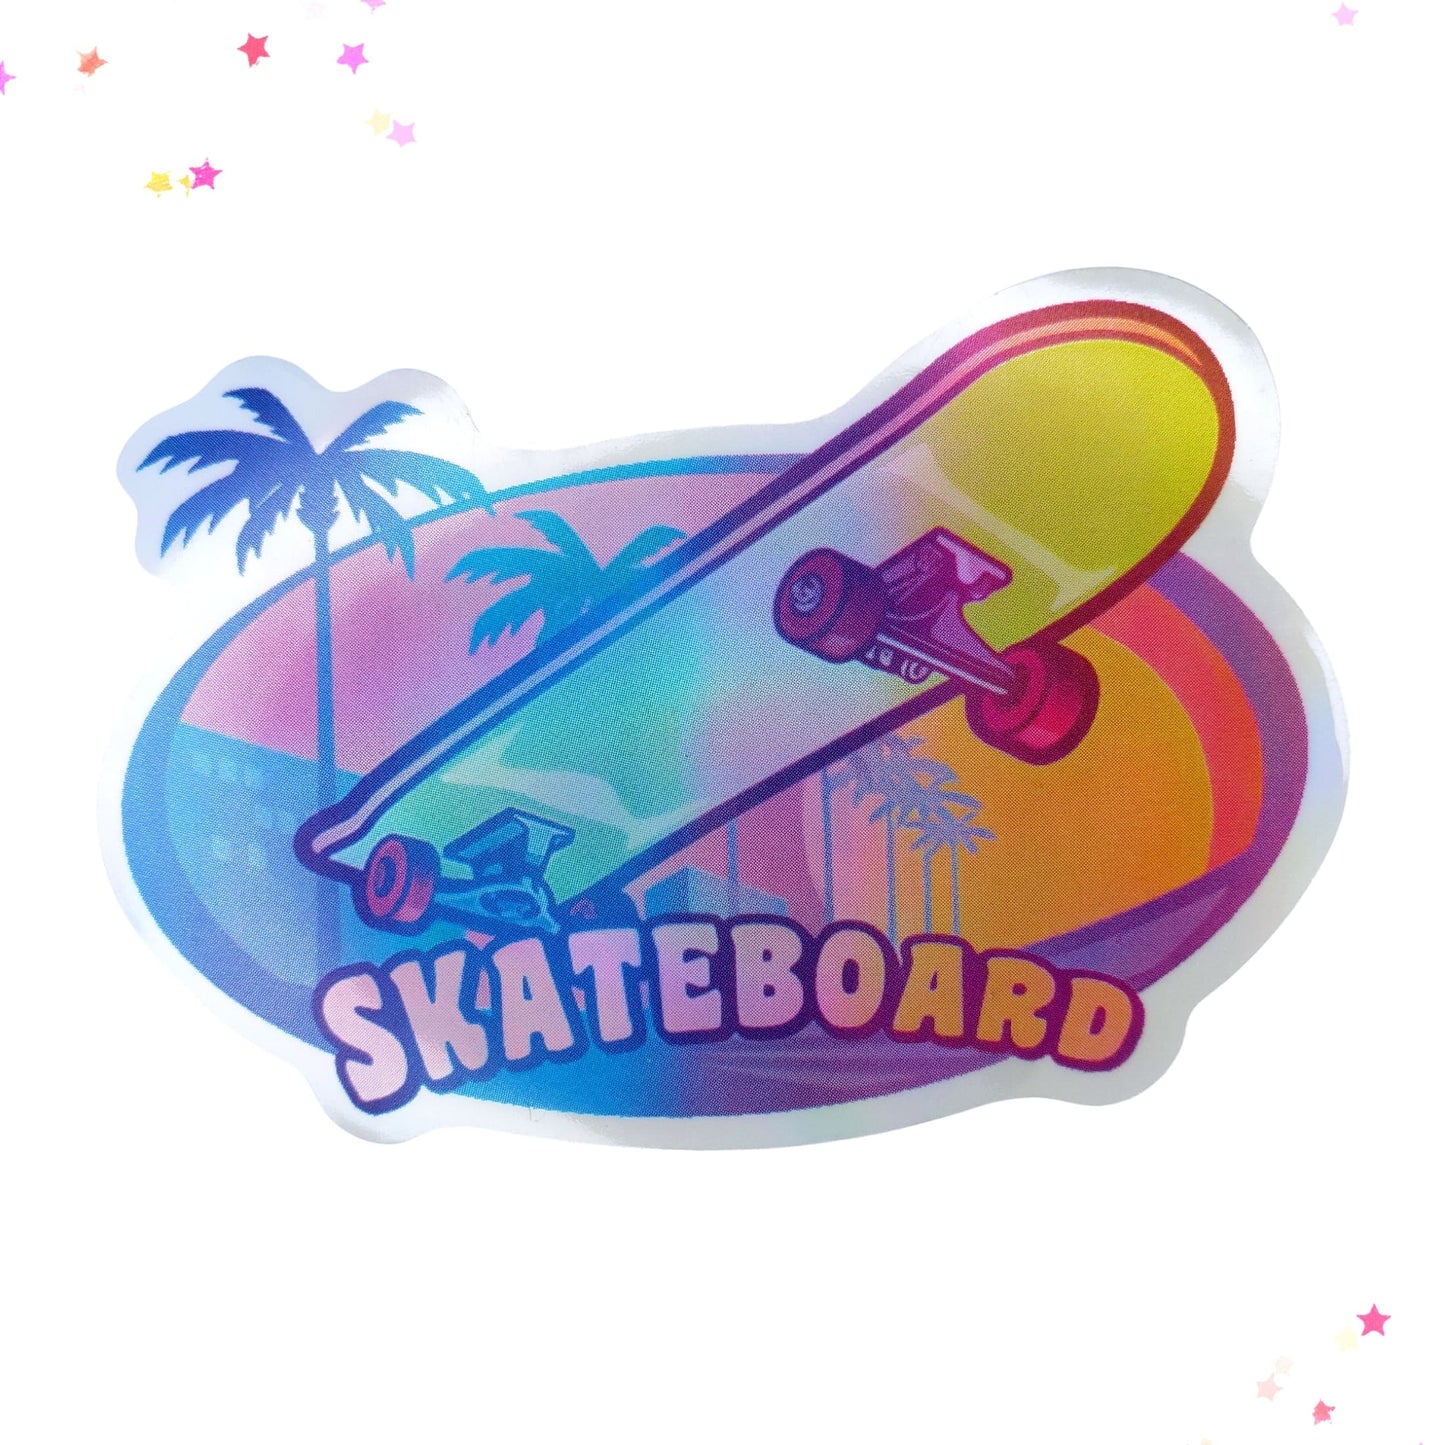 Skateboard Against Palm Tree Sunset Waterproof Holographic Sticker from Confetti Kitty, Only 1.00